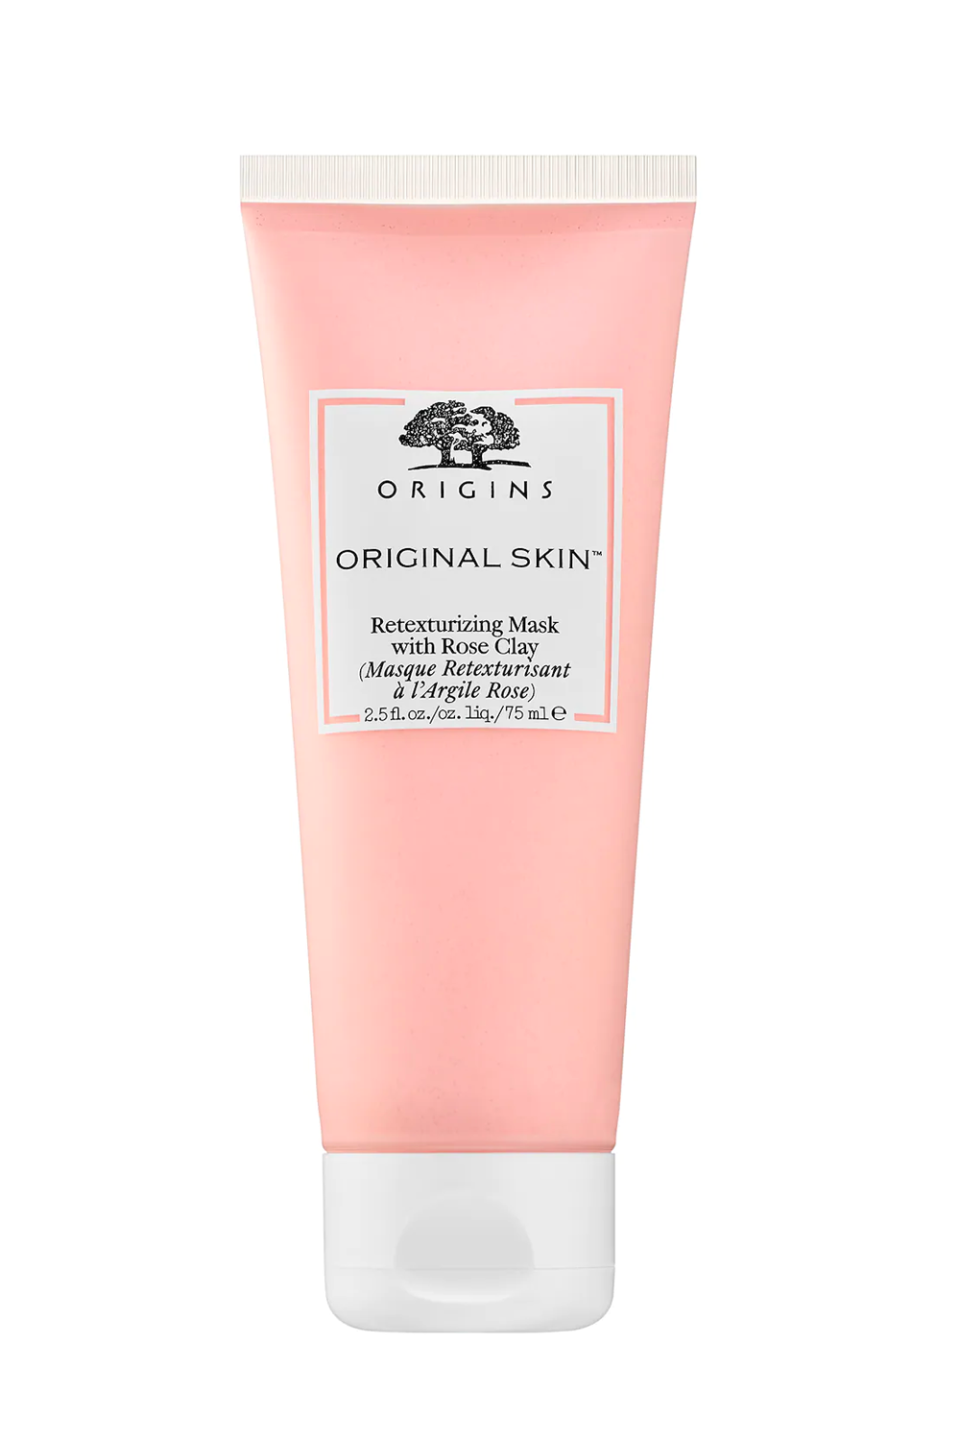 11) Origins Retexturizing Mask With Rose Clay